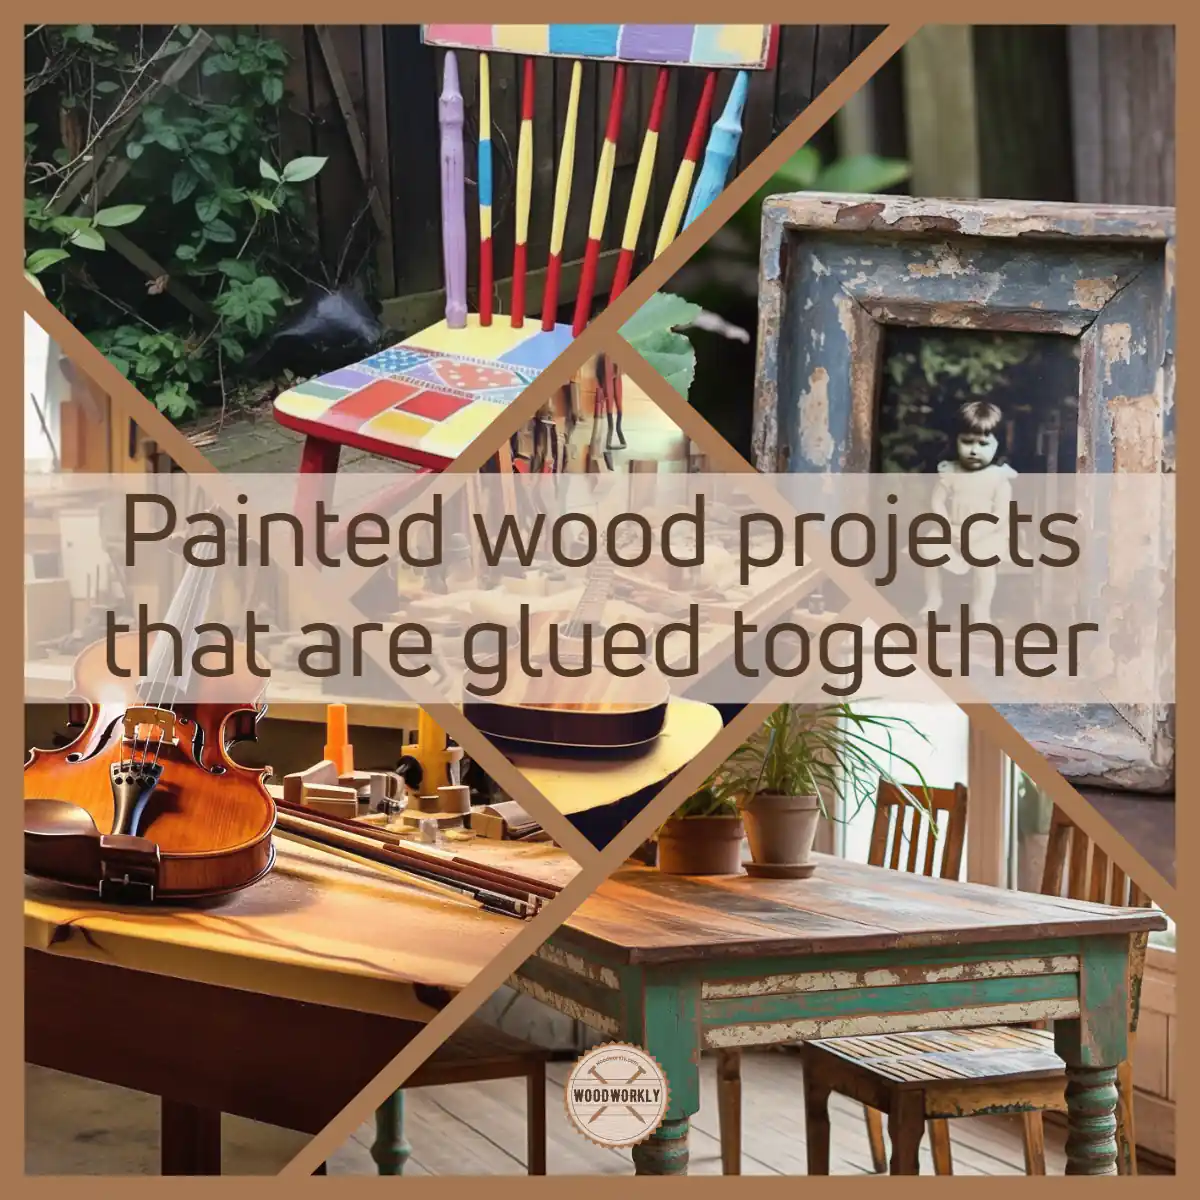 Painted wood projects that are glued together